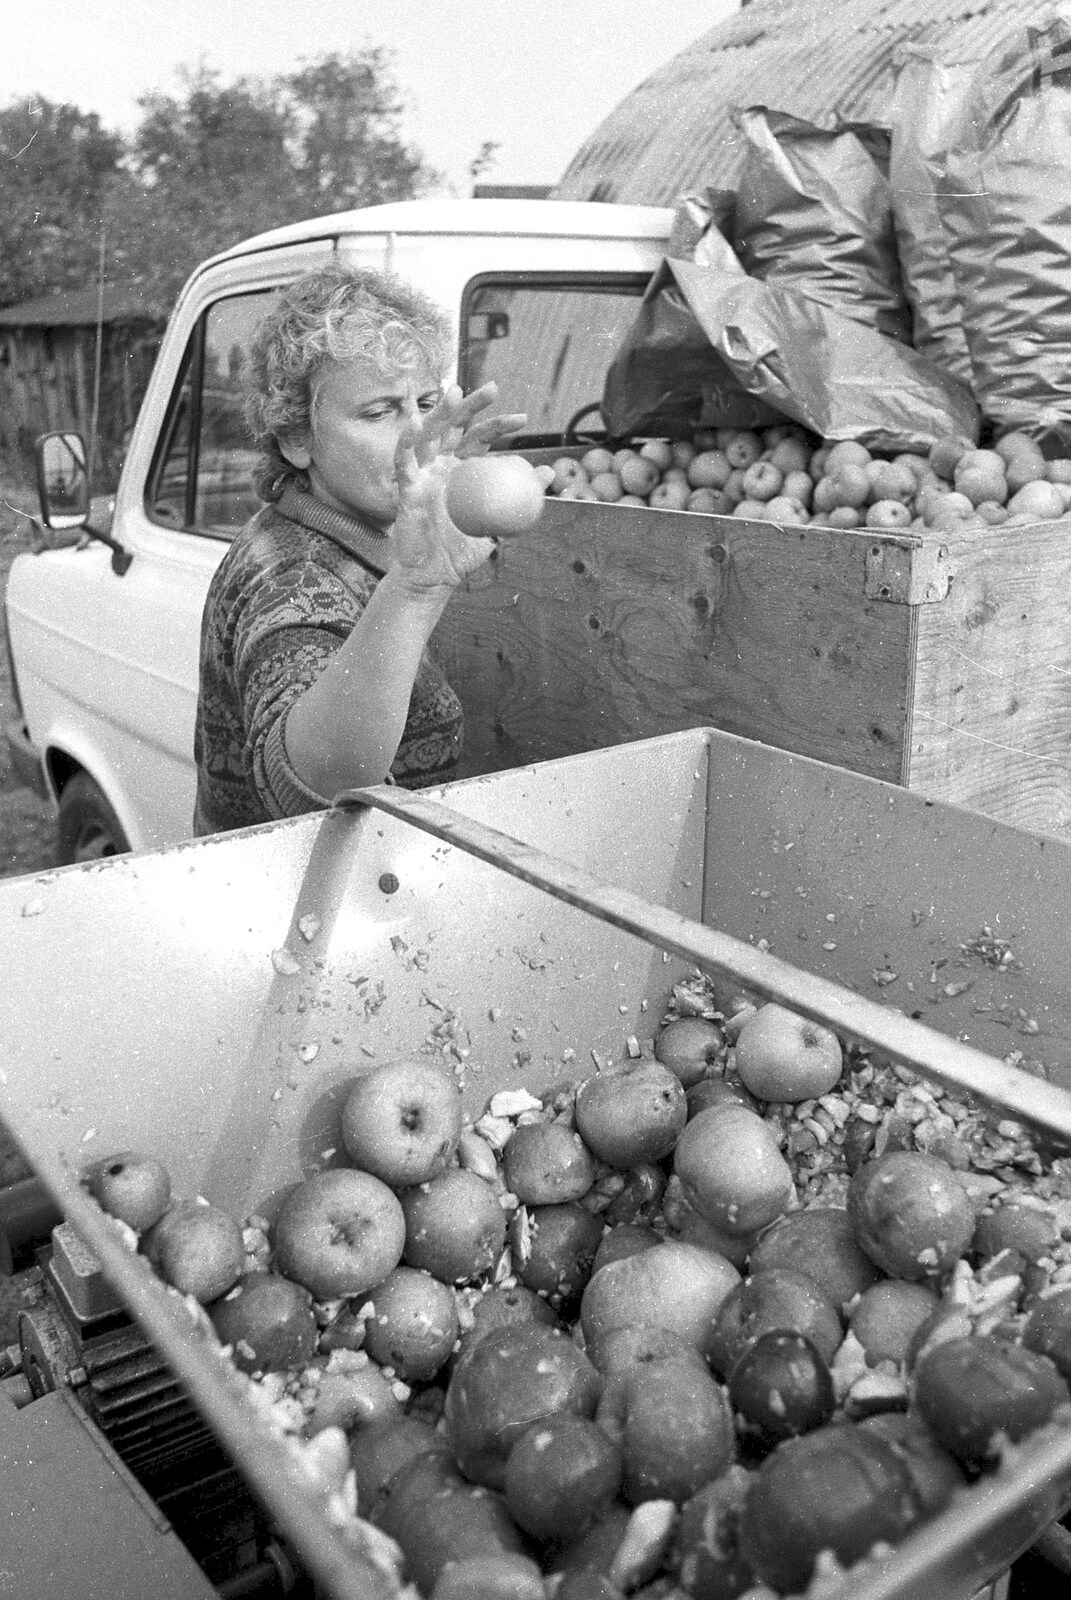 Linda lobs an apple in to the chopper from Cider Making in Black and White, Stuston, Suffolk - 11th October 1992